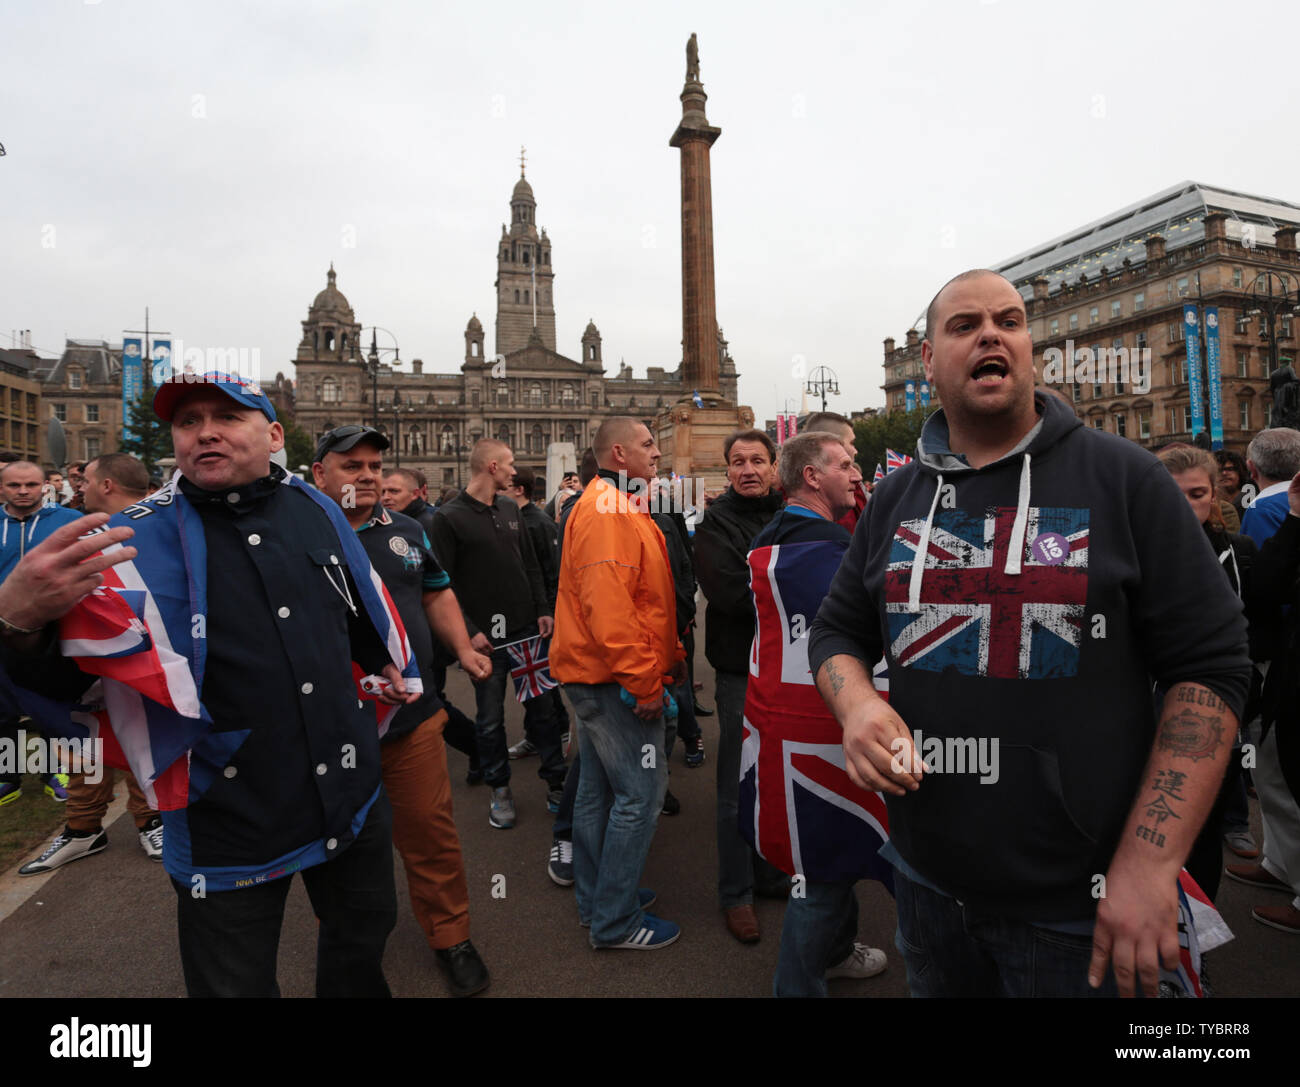 Pro-Unionist voters taunt Yes vote campaigners in George Sq in Glasgow,Scotland on September 19, 2014. Pro Union voters won the referendum by Fifty-Five percent to Forty-Five percent. The First Minister of Scotland Alex Salmond has resigned today following the referendum vote.      UPI / Hugo Philpott Stock Photo